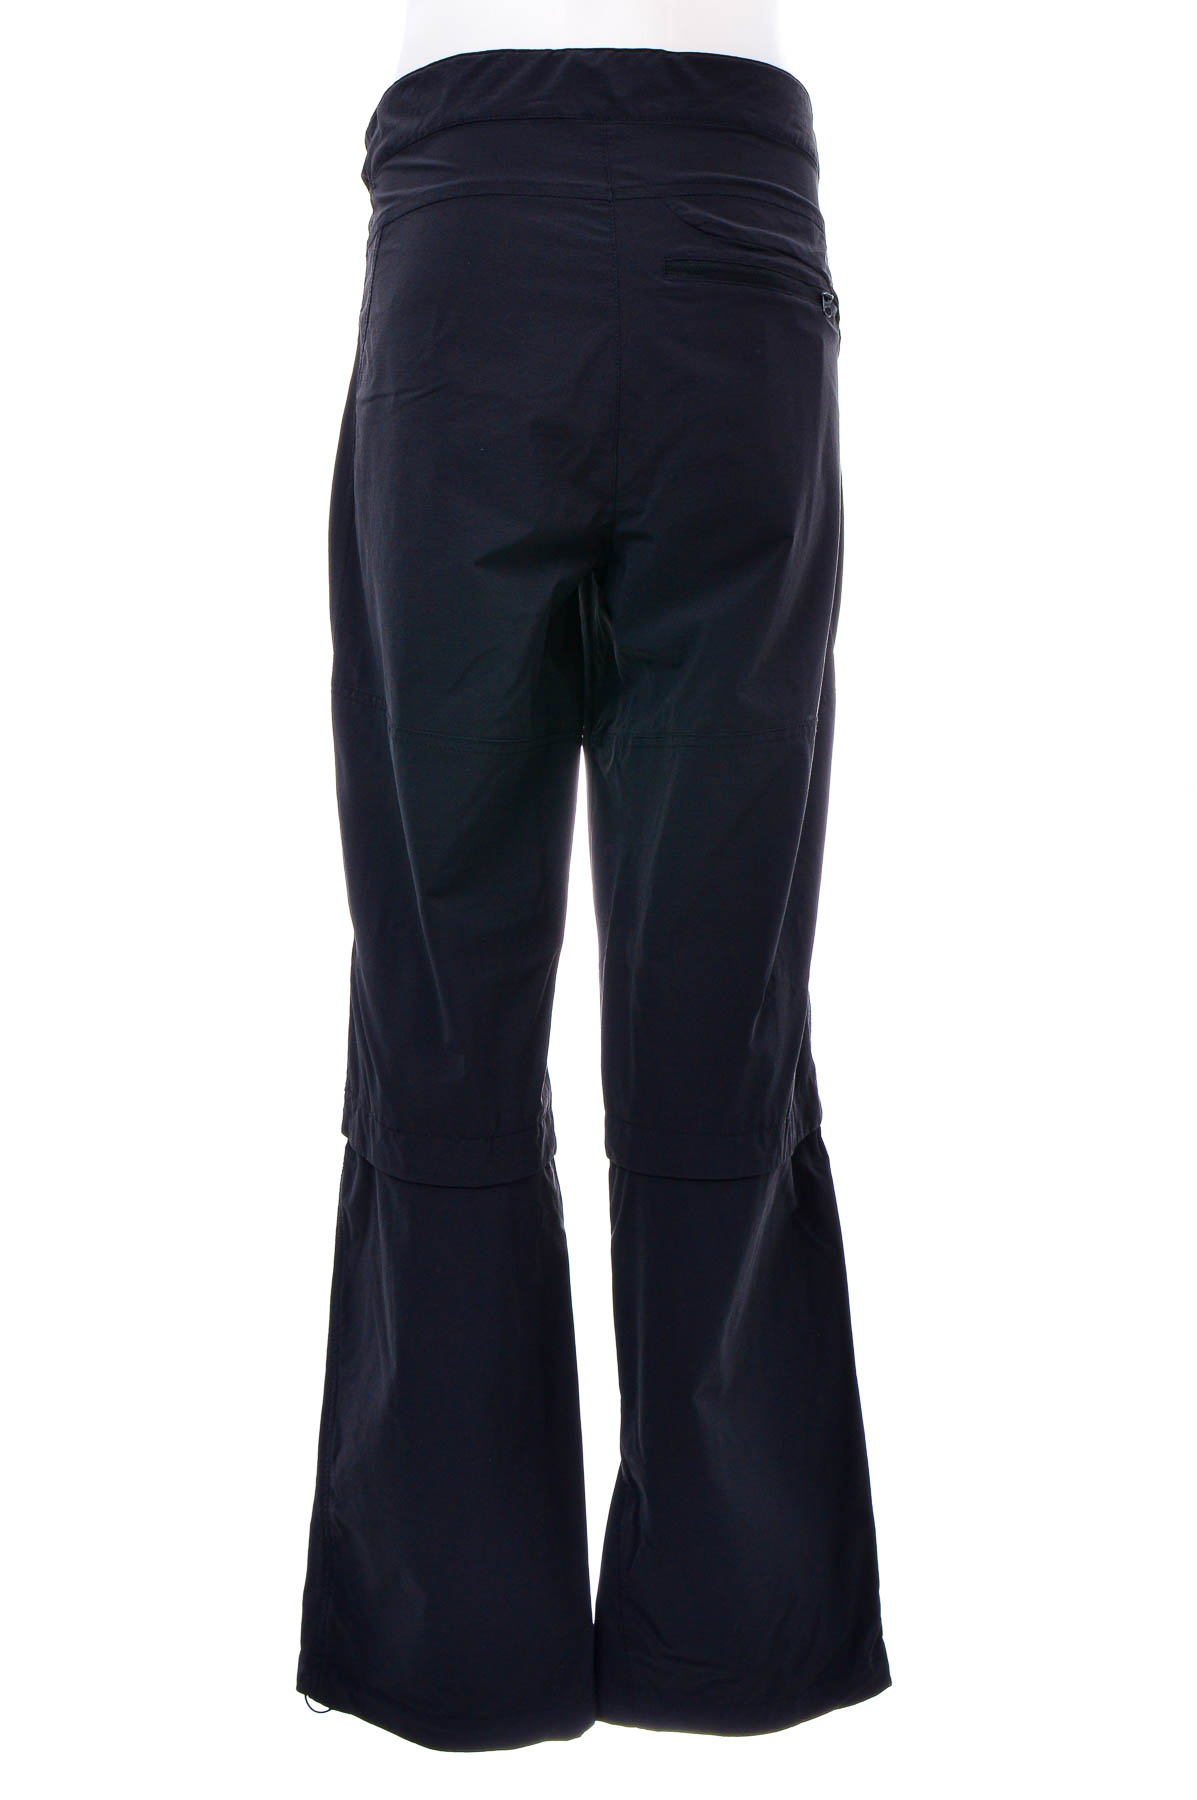 Men's trousers - TS TRAUNSTEIN - 1